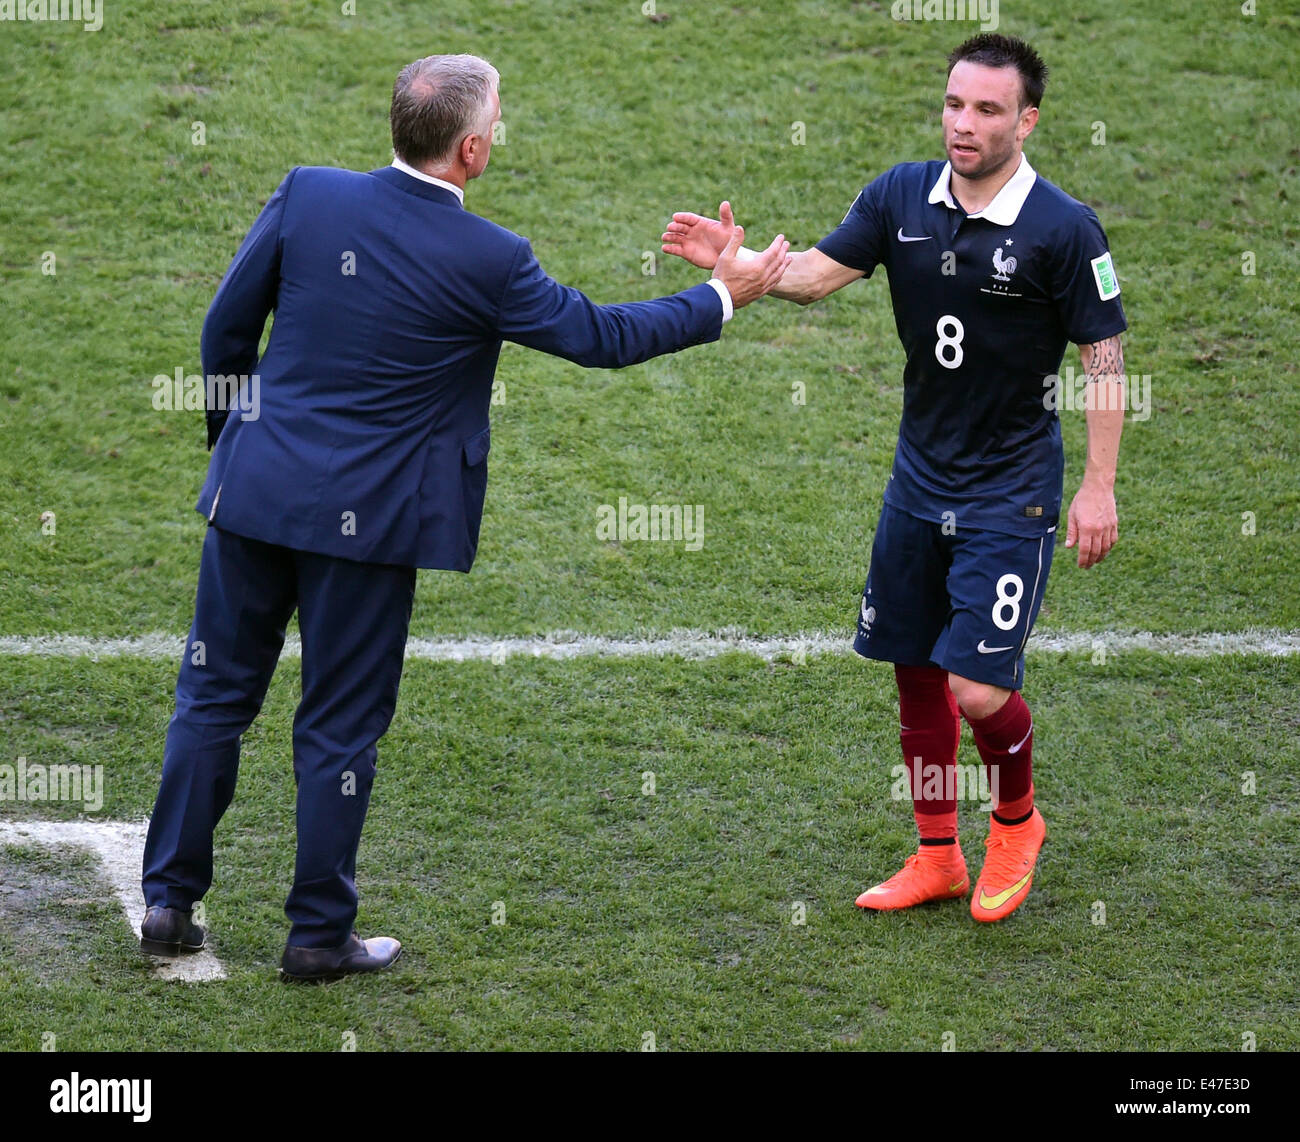 Rio de Janeiro, Brazil. 04th July, 2014. Head coach Didier Deschamps (L) of France shakes hands with Mathieu Valbuena during the FIFA World Cup 2014 quarter final soccer match between France and Germany at Estadio do Maracana in Rio de Janeiro, Brazil, 04 July 2014. Photo: Marcus Brandt/dpa/Alamy Live News Stock Photo